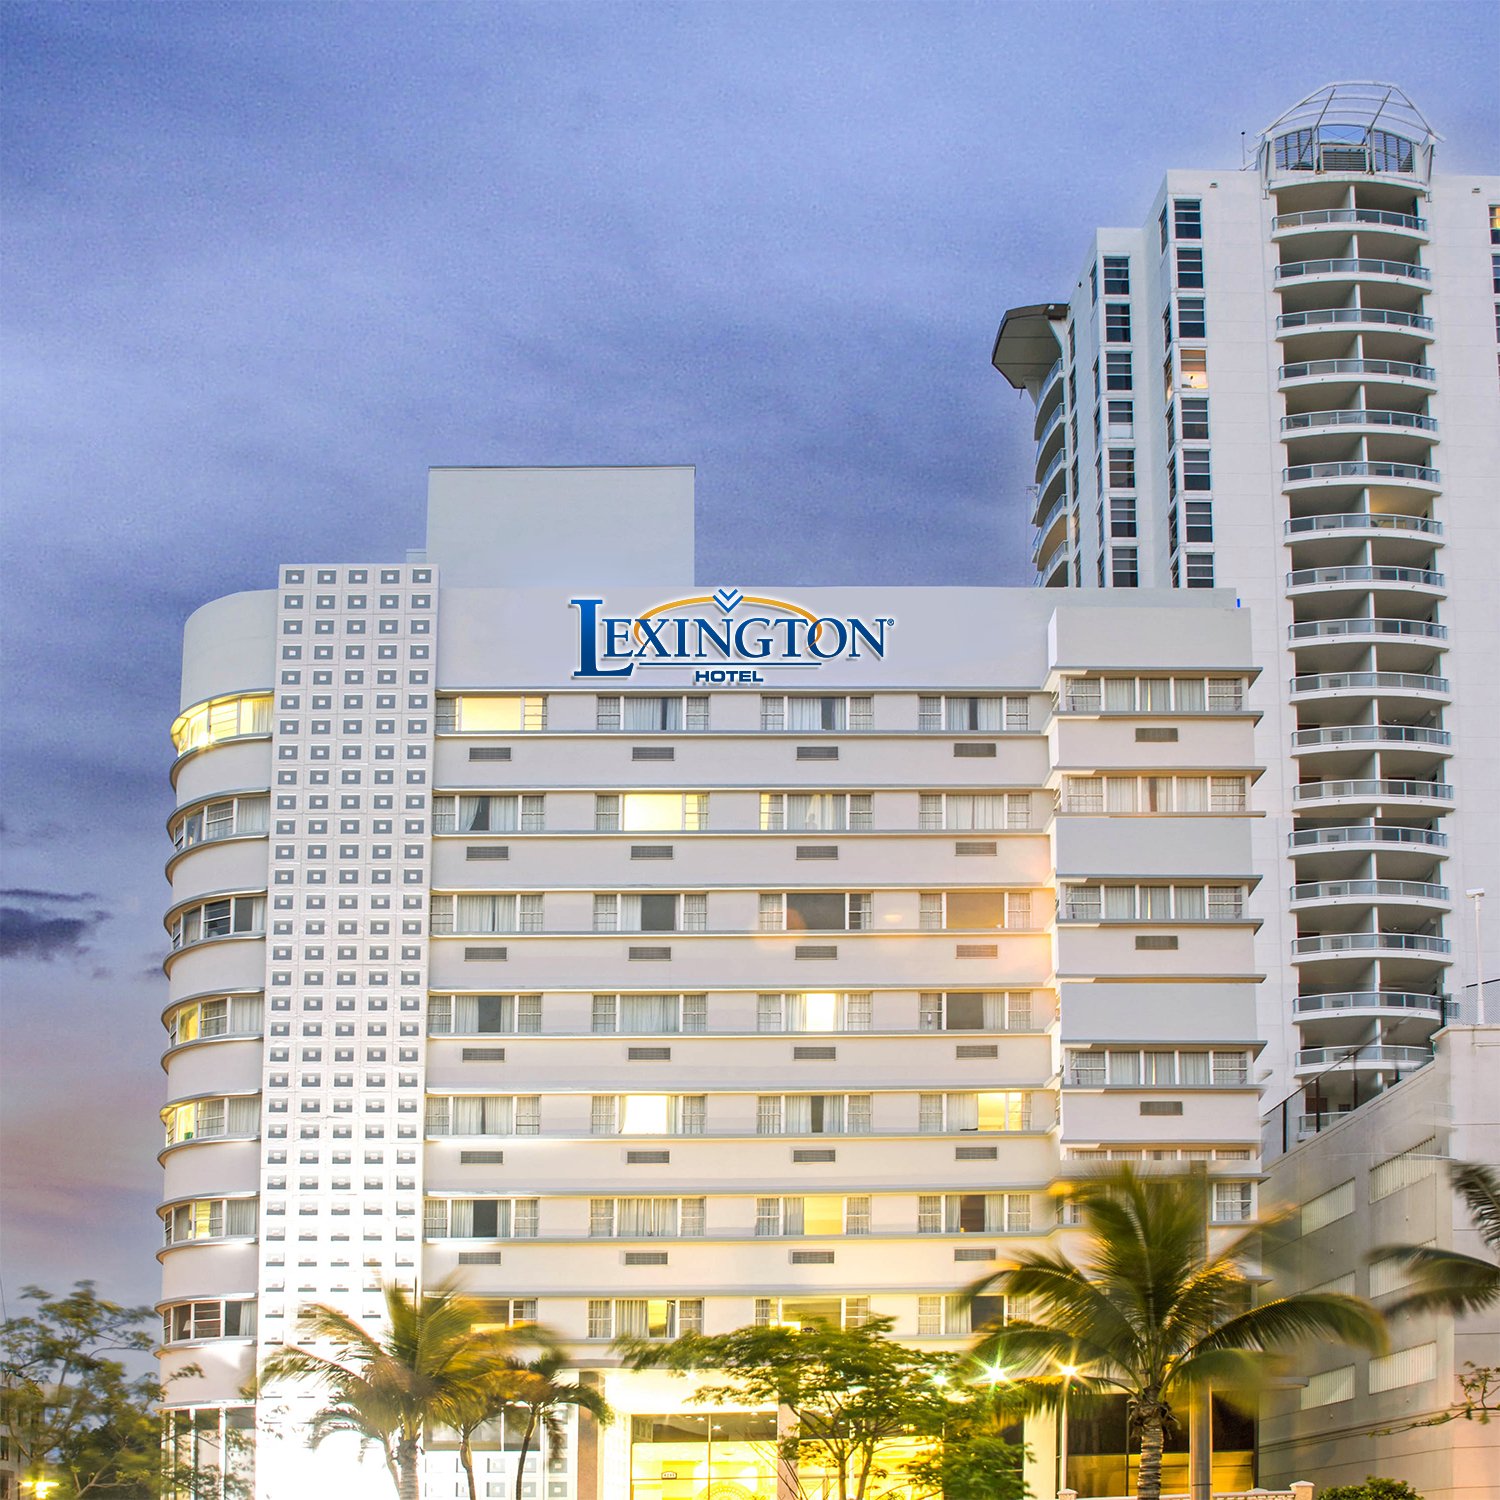 The hotel which is owned by Charles Hotel Group joins previously-opened Vantage properties in Jacksonville and Daytona Beac